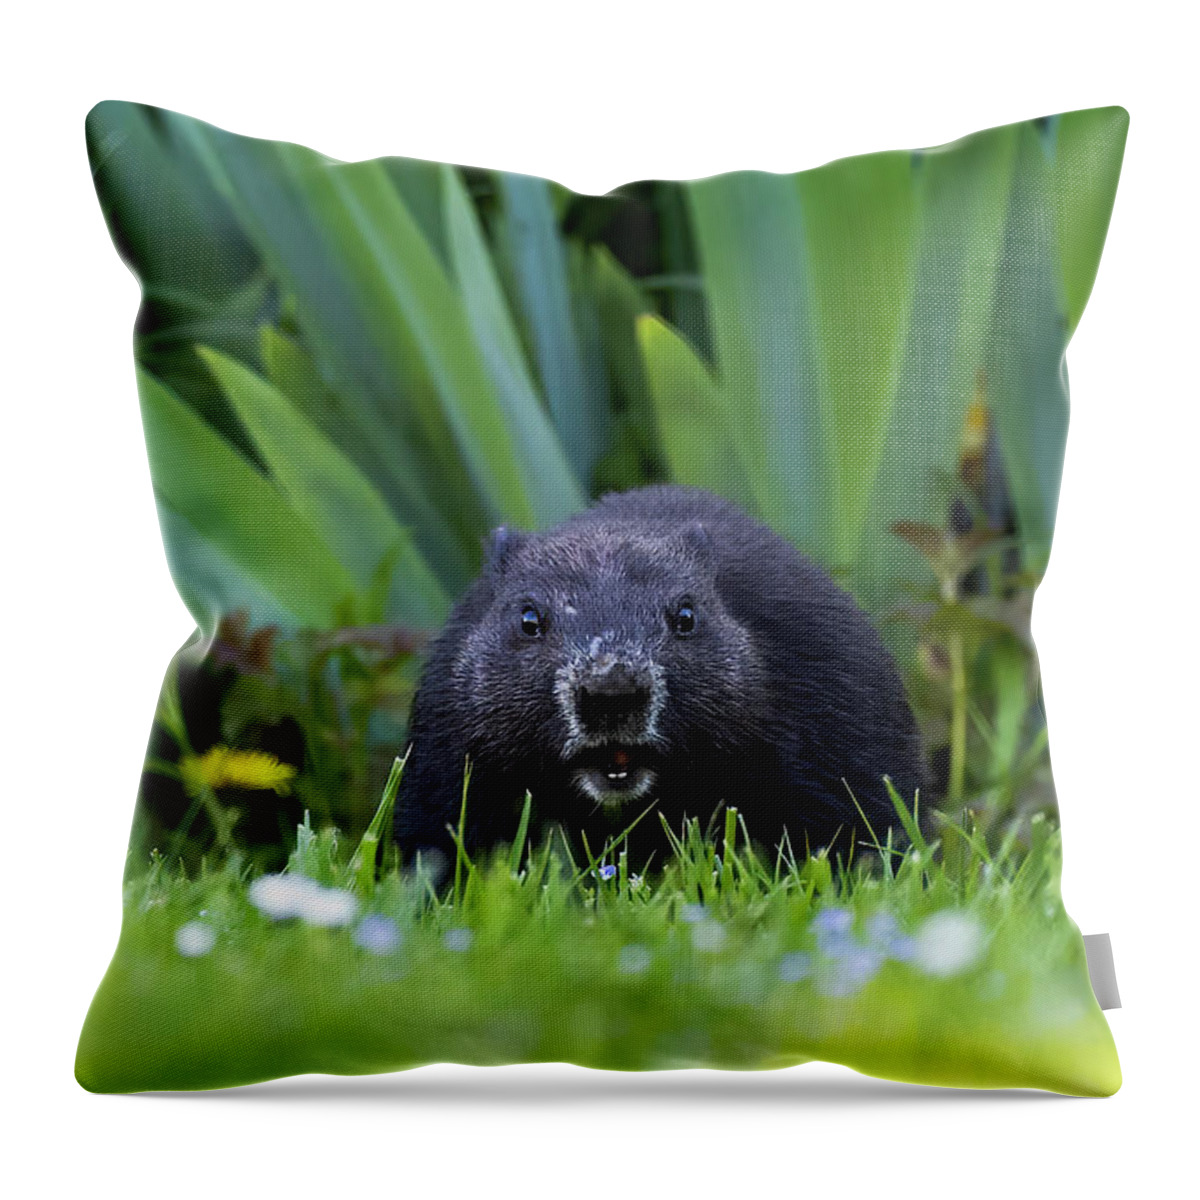 Woodchuck Throw Pillow featuring the photograph Opie the Black Woodchuck by Everet Regal